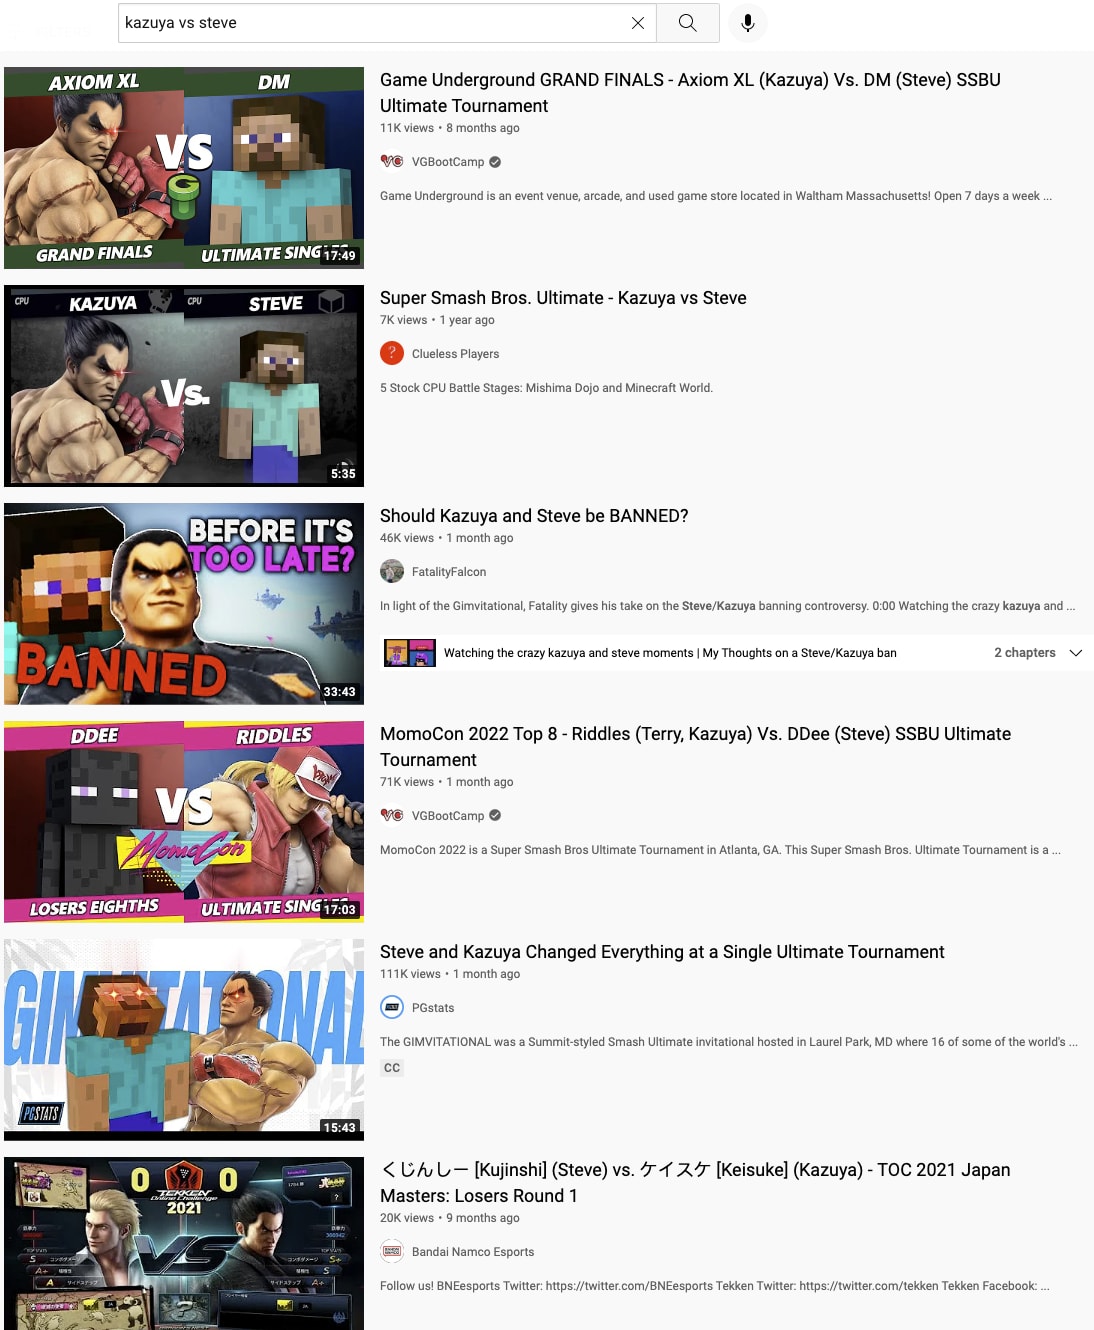 If you search for "Kazuya vs Steve" you don't see Tekken until the 6th search result